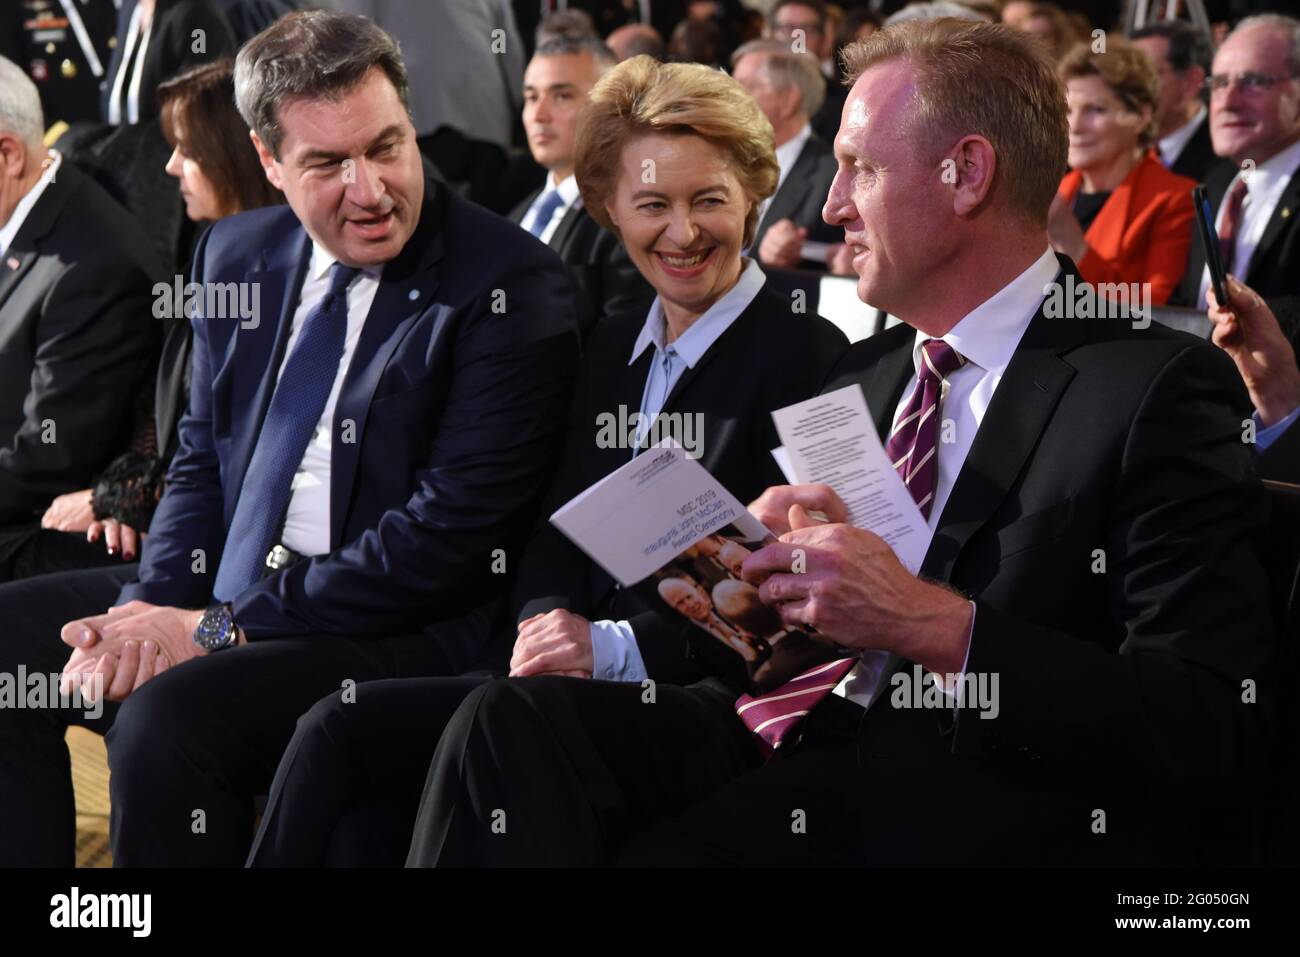 Reportage:   U.S. Acting Secretary of Defense Patrick M. Shanahan talks with German Minister of Defense German Minister of Defense Ursula von der Leyen and the Minister President of Bavaria, Markus SÃ¶der, at the Munich Security Conferenceâ€™s Inaugural John McCain Award Ceremony, Munich, Germany, Feb. 15, 2019. Stock Photo